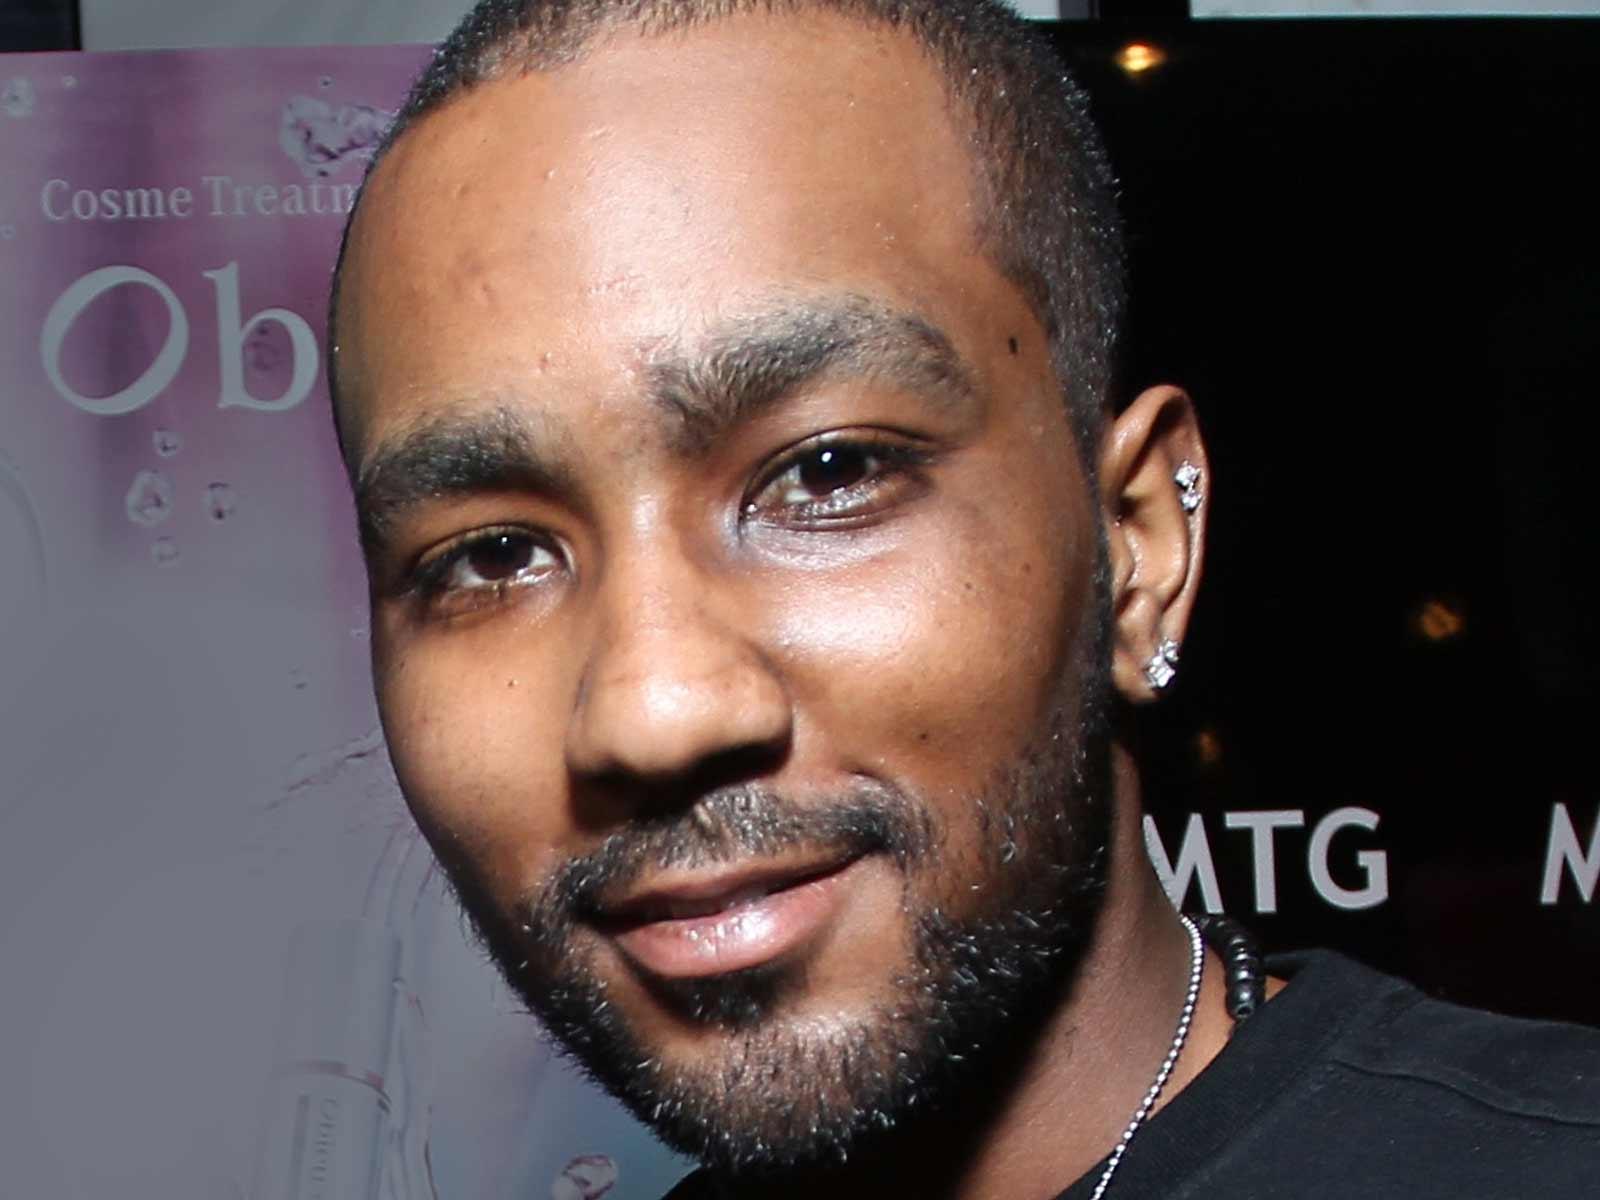 Nick Gordon’s Girlfriend Writes a Letter to the Judge on His Behalf: ‘We Truly Love Each Other’